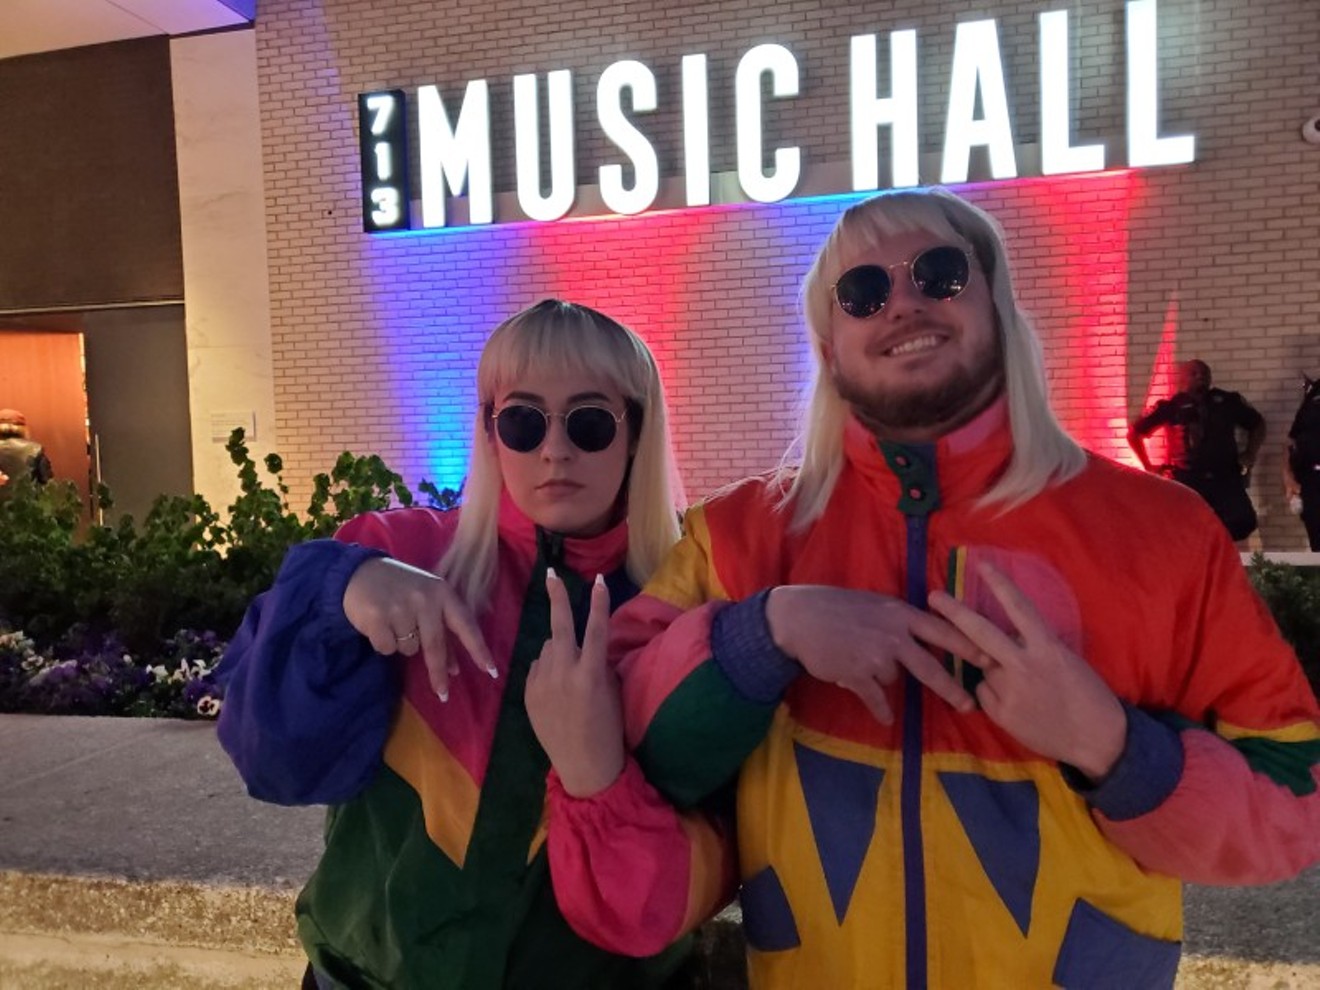 Fans of eclectic acts live Oliver Tree have flocked to 713 Music Hall since its debut last November